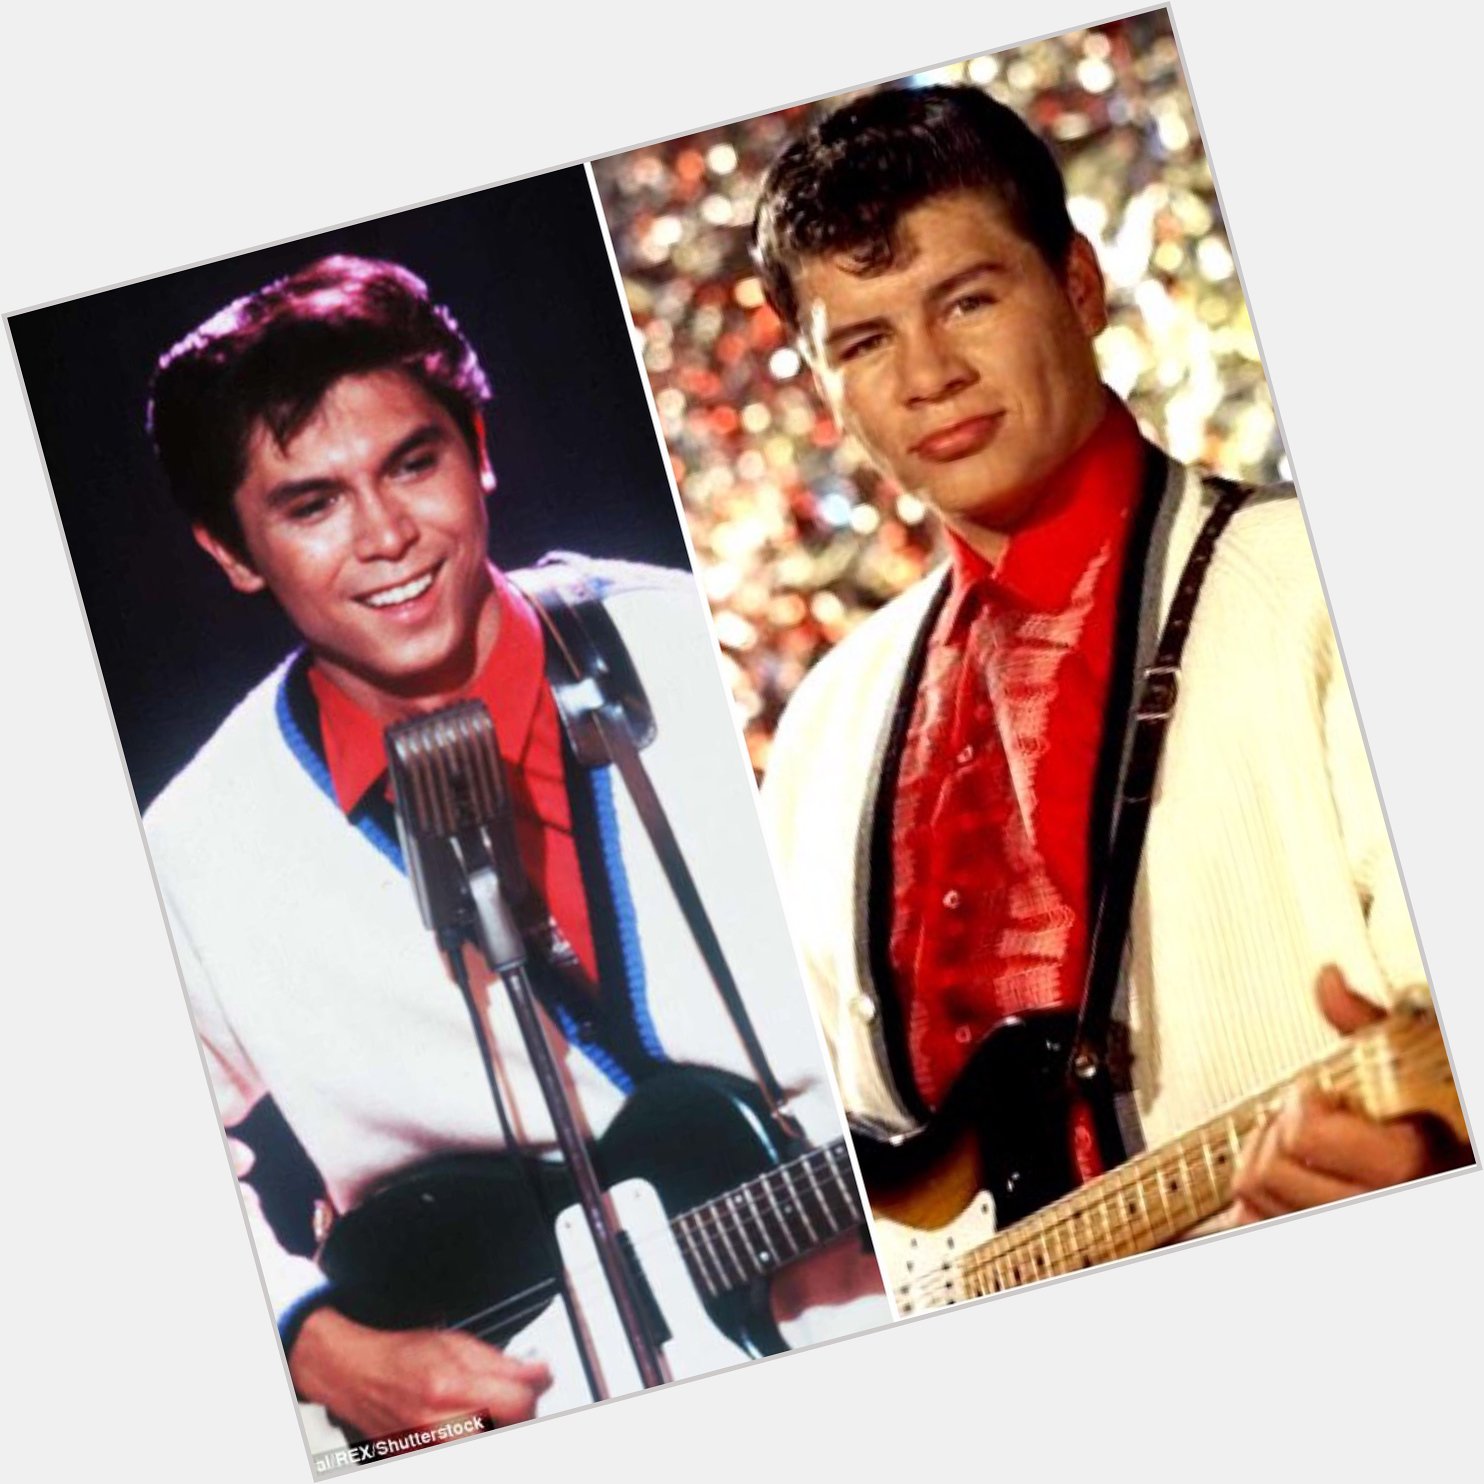  Can you wish Ritchie Valens happy birthday? He would have been 78 today. 